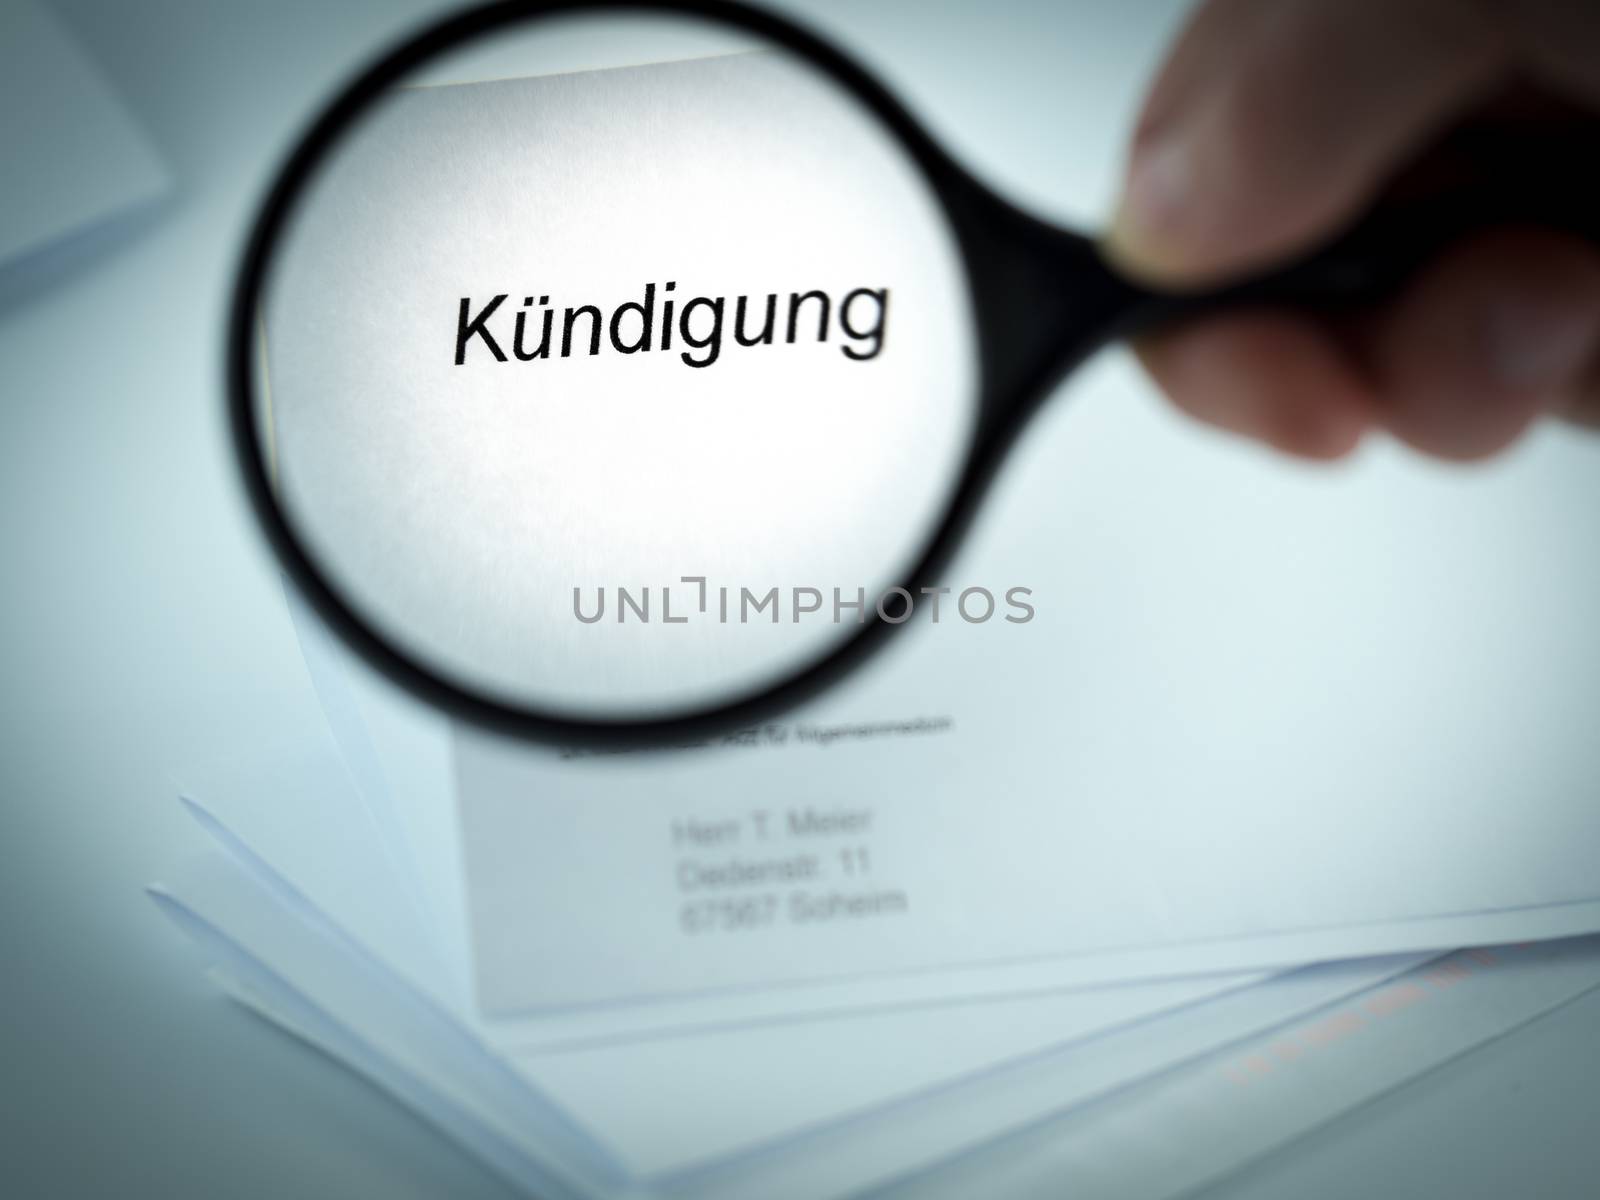 Cover letter with the word Kündigung in the letterhead